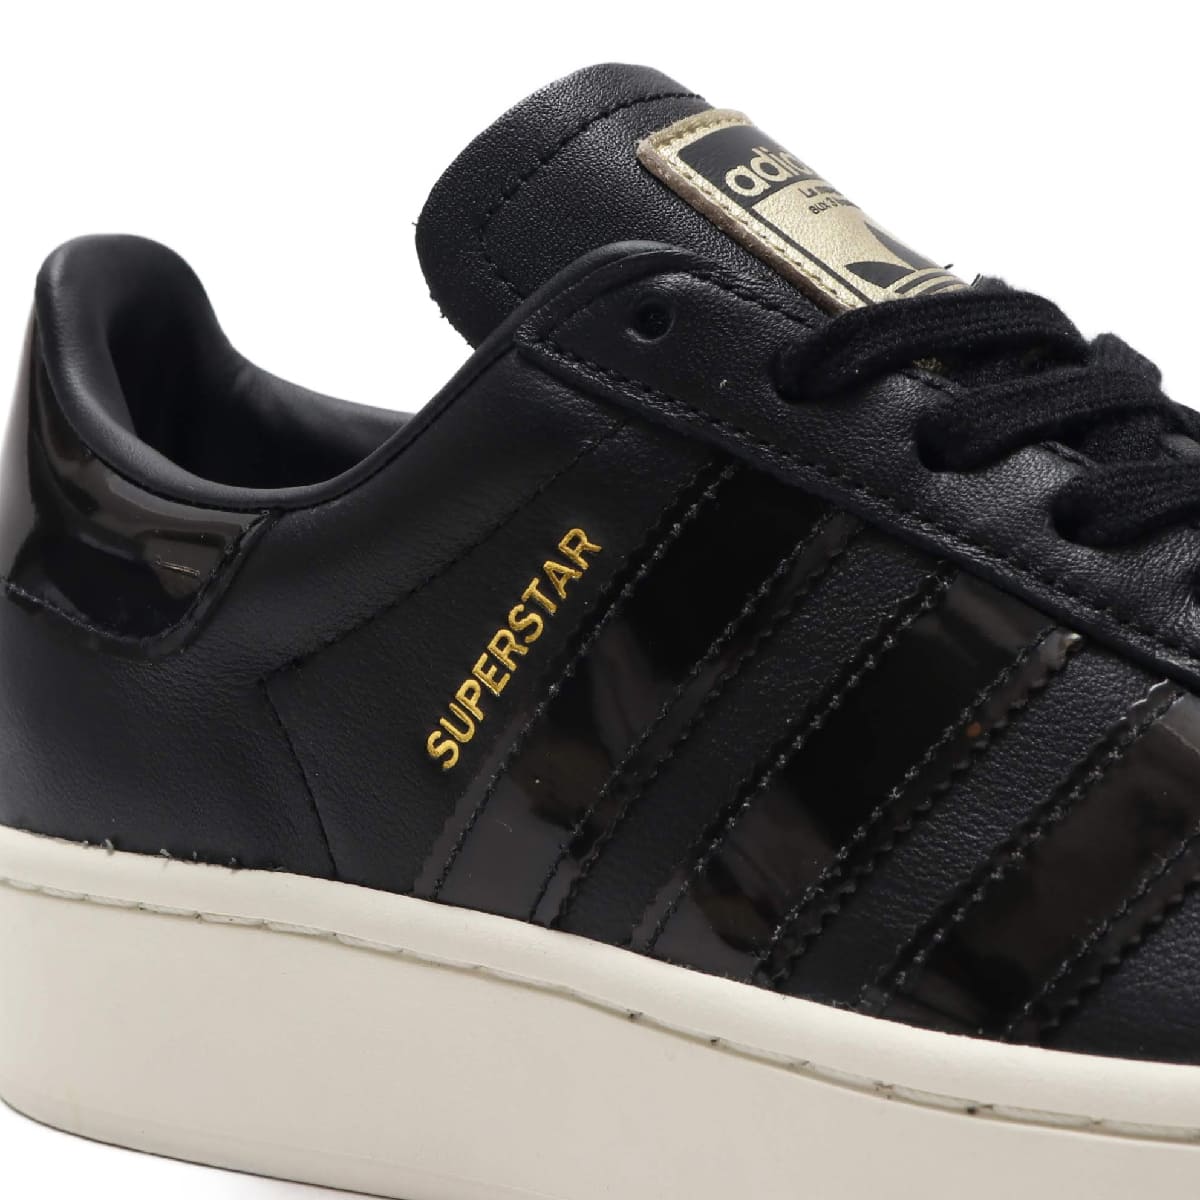 adidas SUPERSTARBOLD W CORE BLACK/OFF WHITE/GOLD METARIC 20SS-S